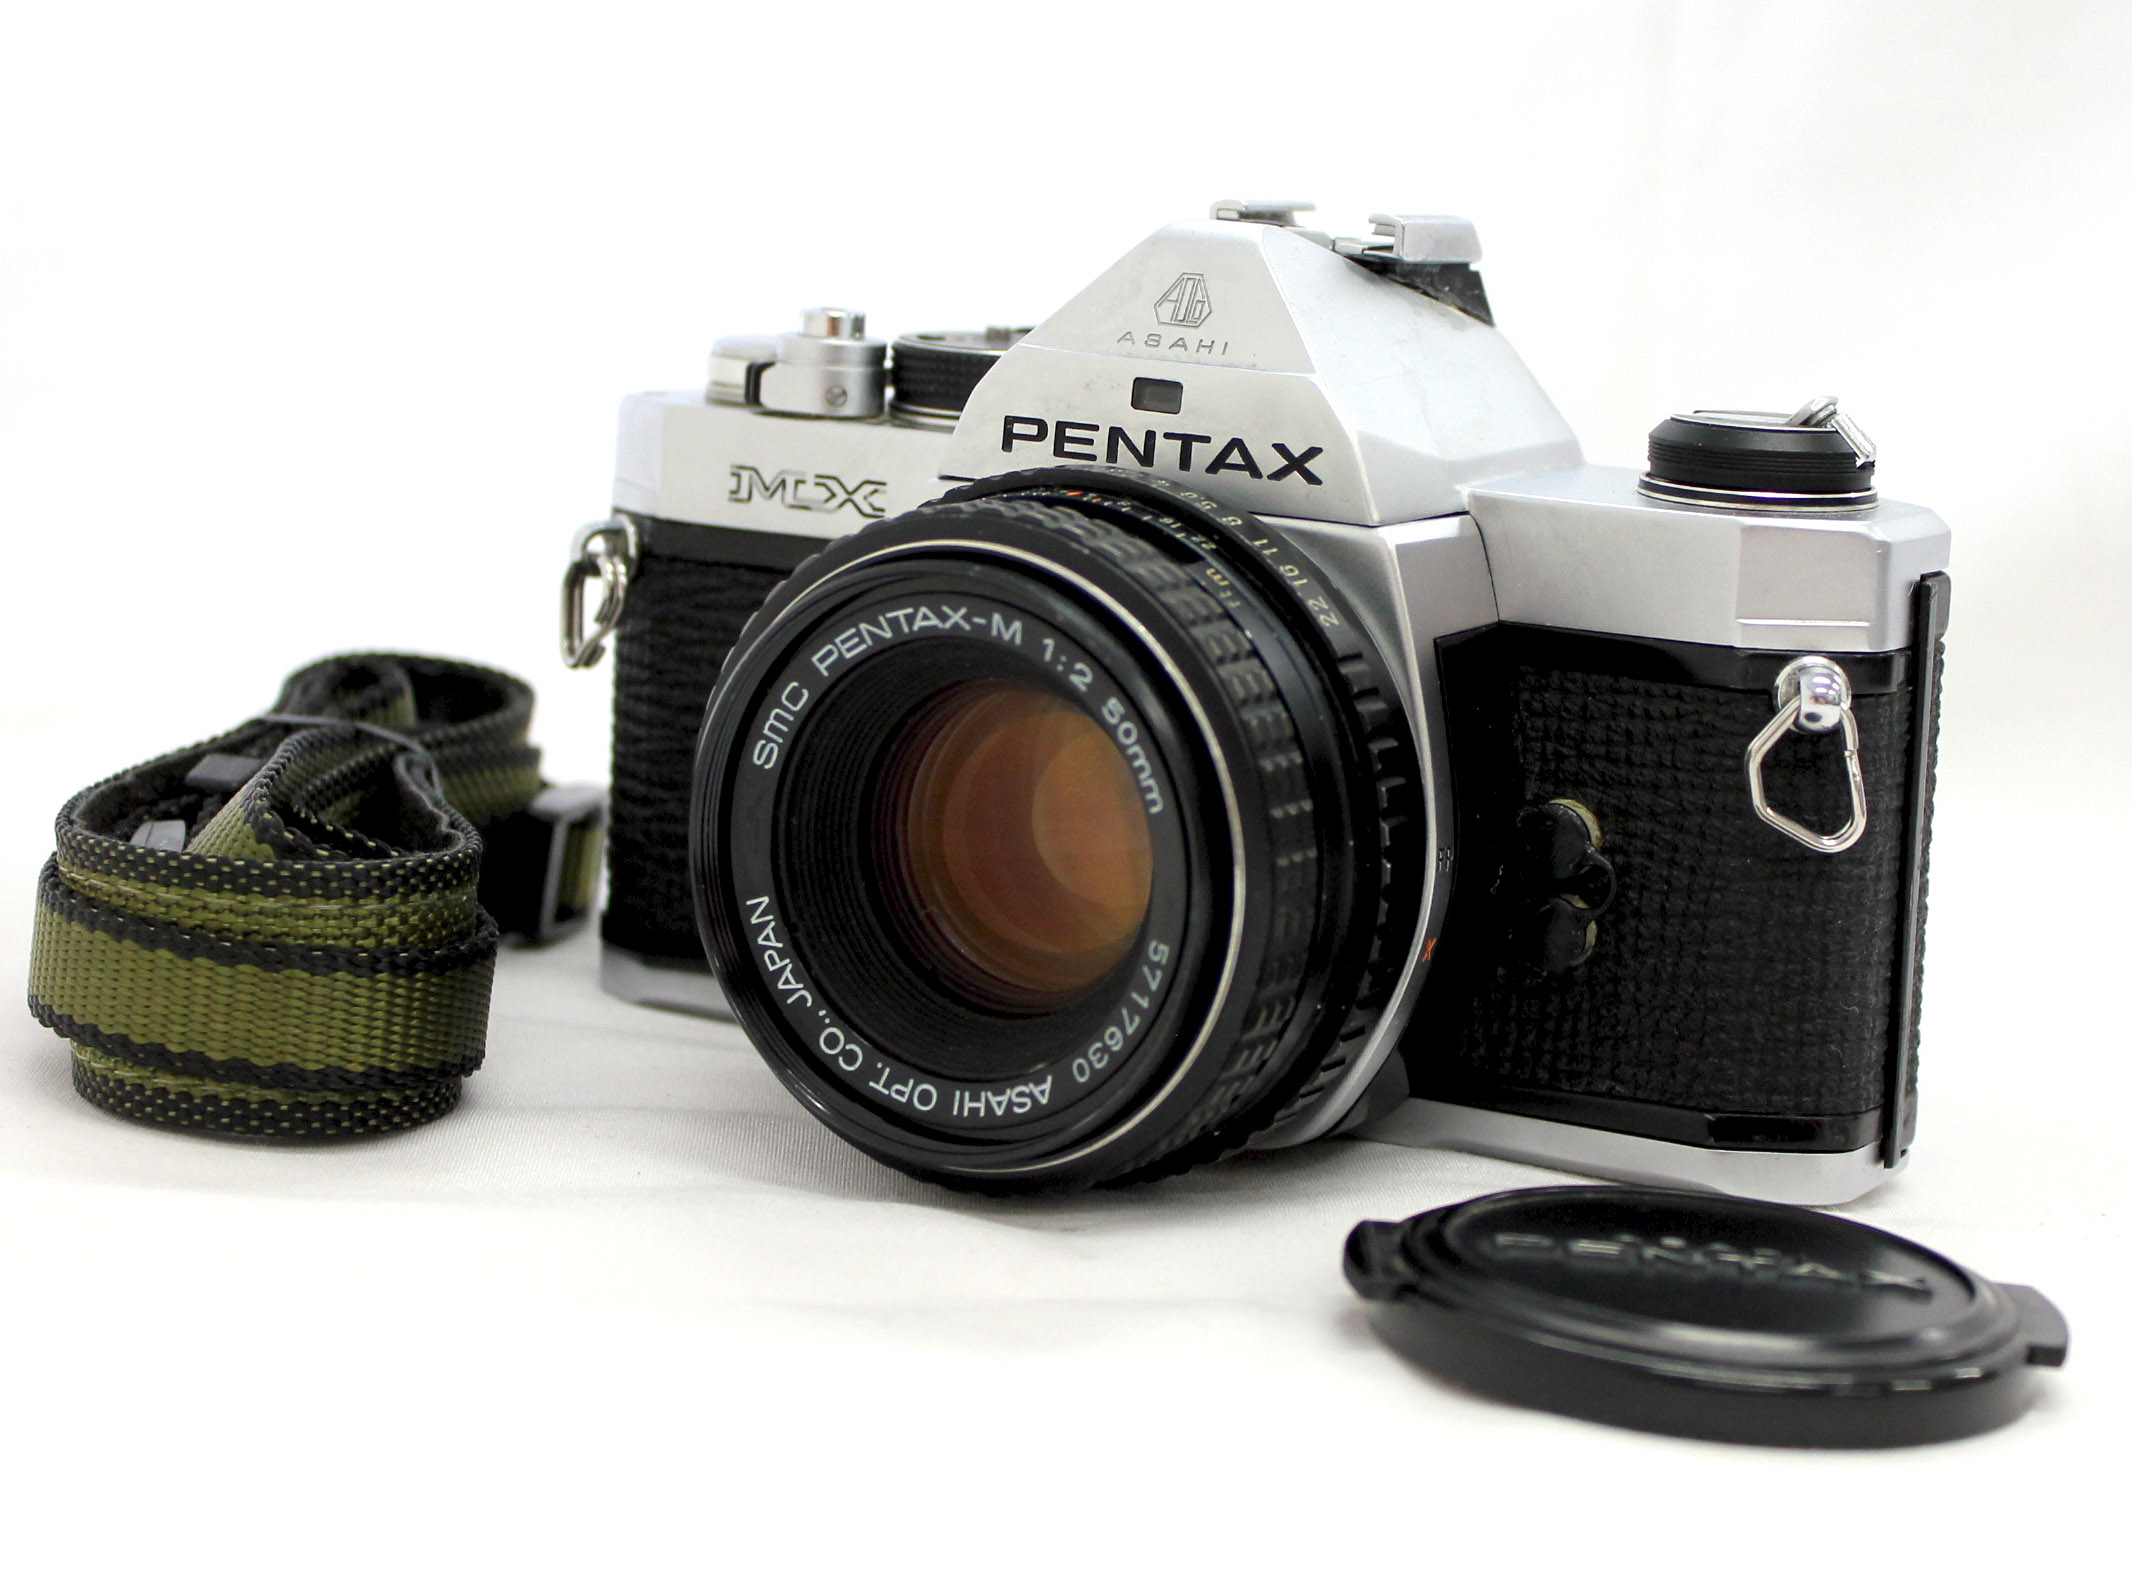 Japan Used Camera Shop | [Excellent++++] Pentax MX SLR 35mm Film Camera with SMC Pentax-M 50mm F/2 Lens from Japan